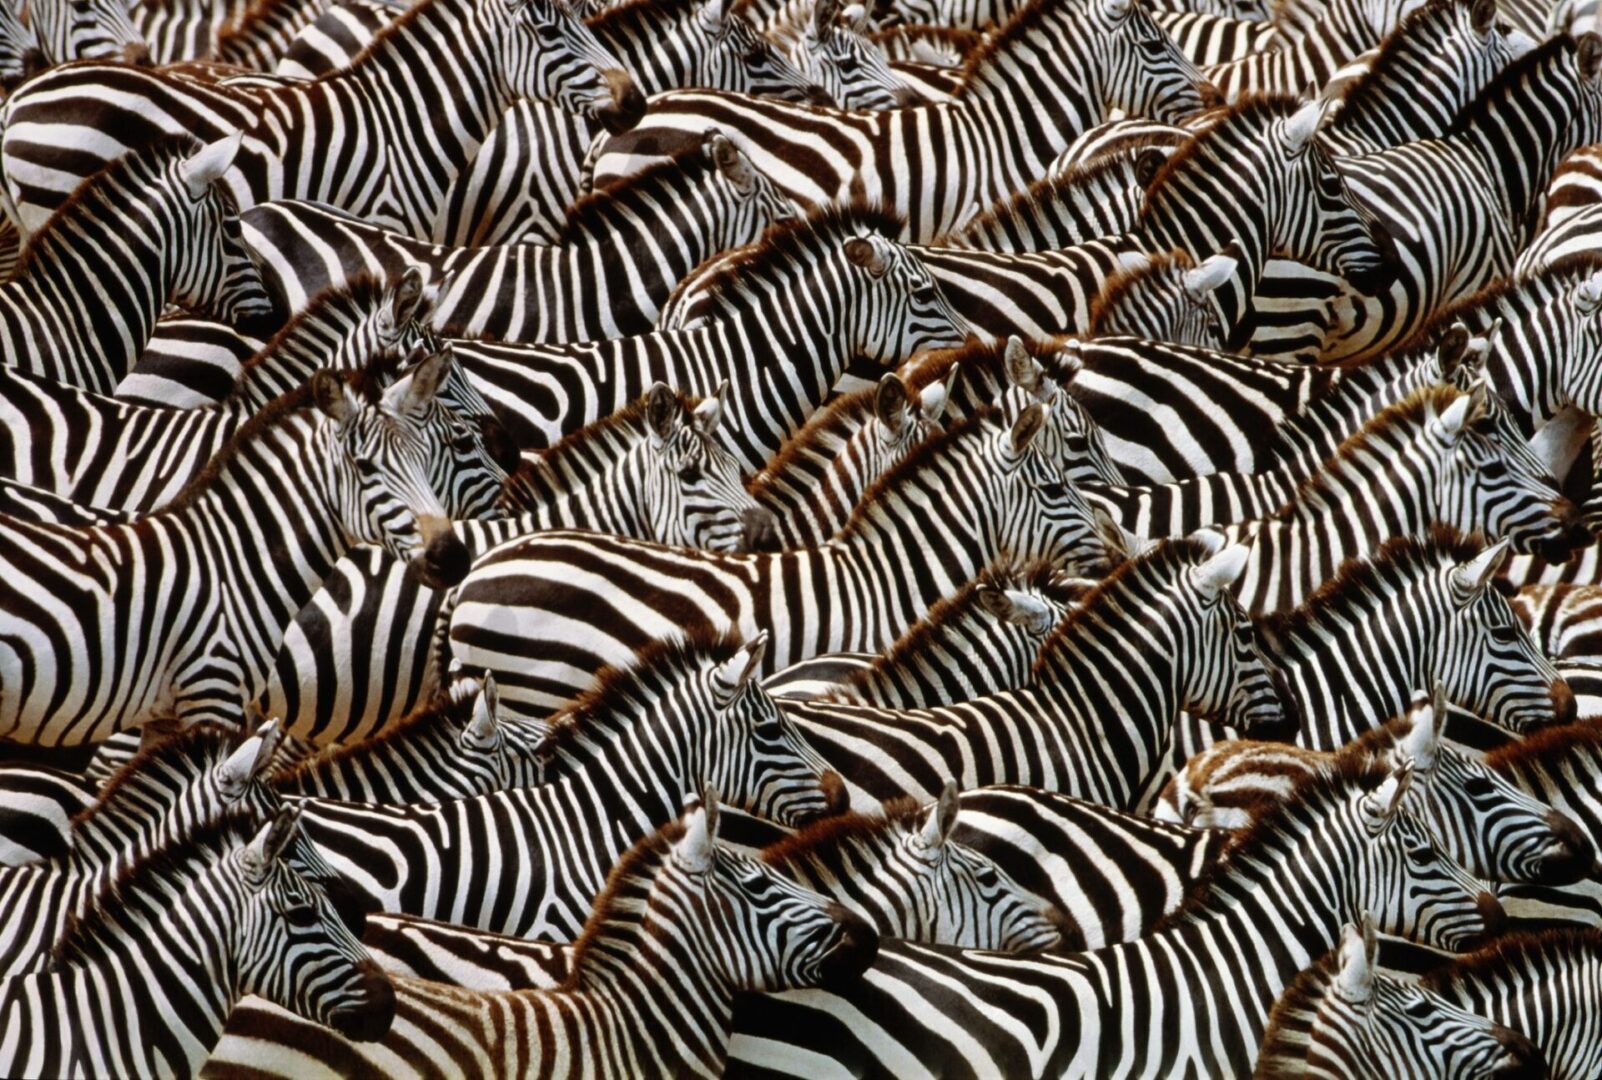 Grant's zebras are a subspecies of the Burchell's zebra. They live in family groups consisting of one male, a number of females and their offspring. The are native to savannah and open woodland areas in East and South Africa.